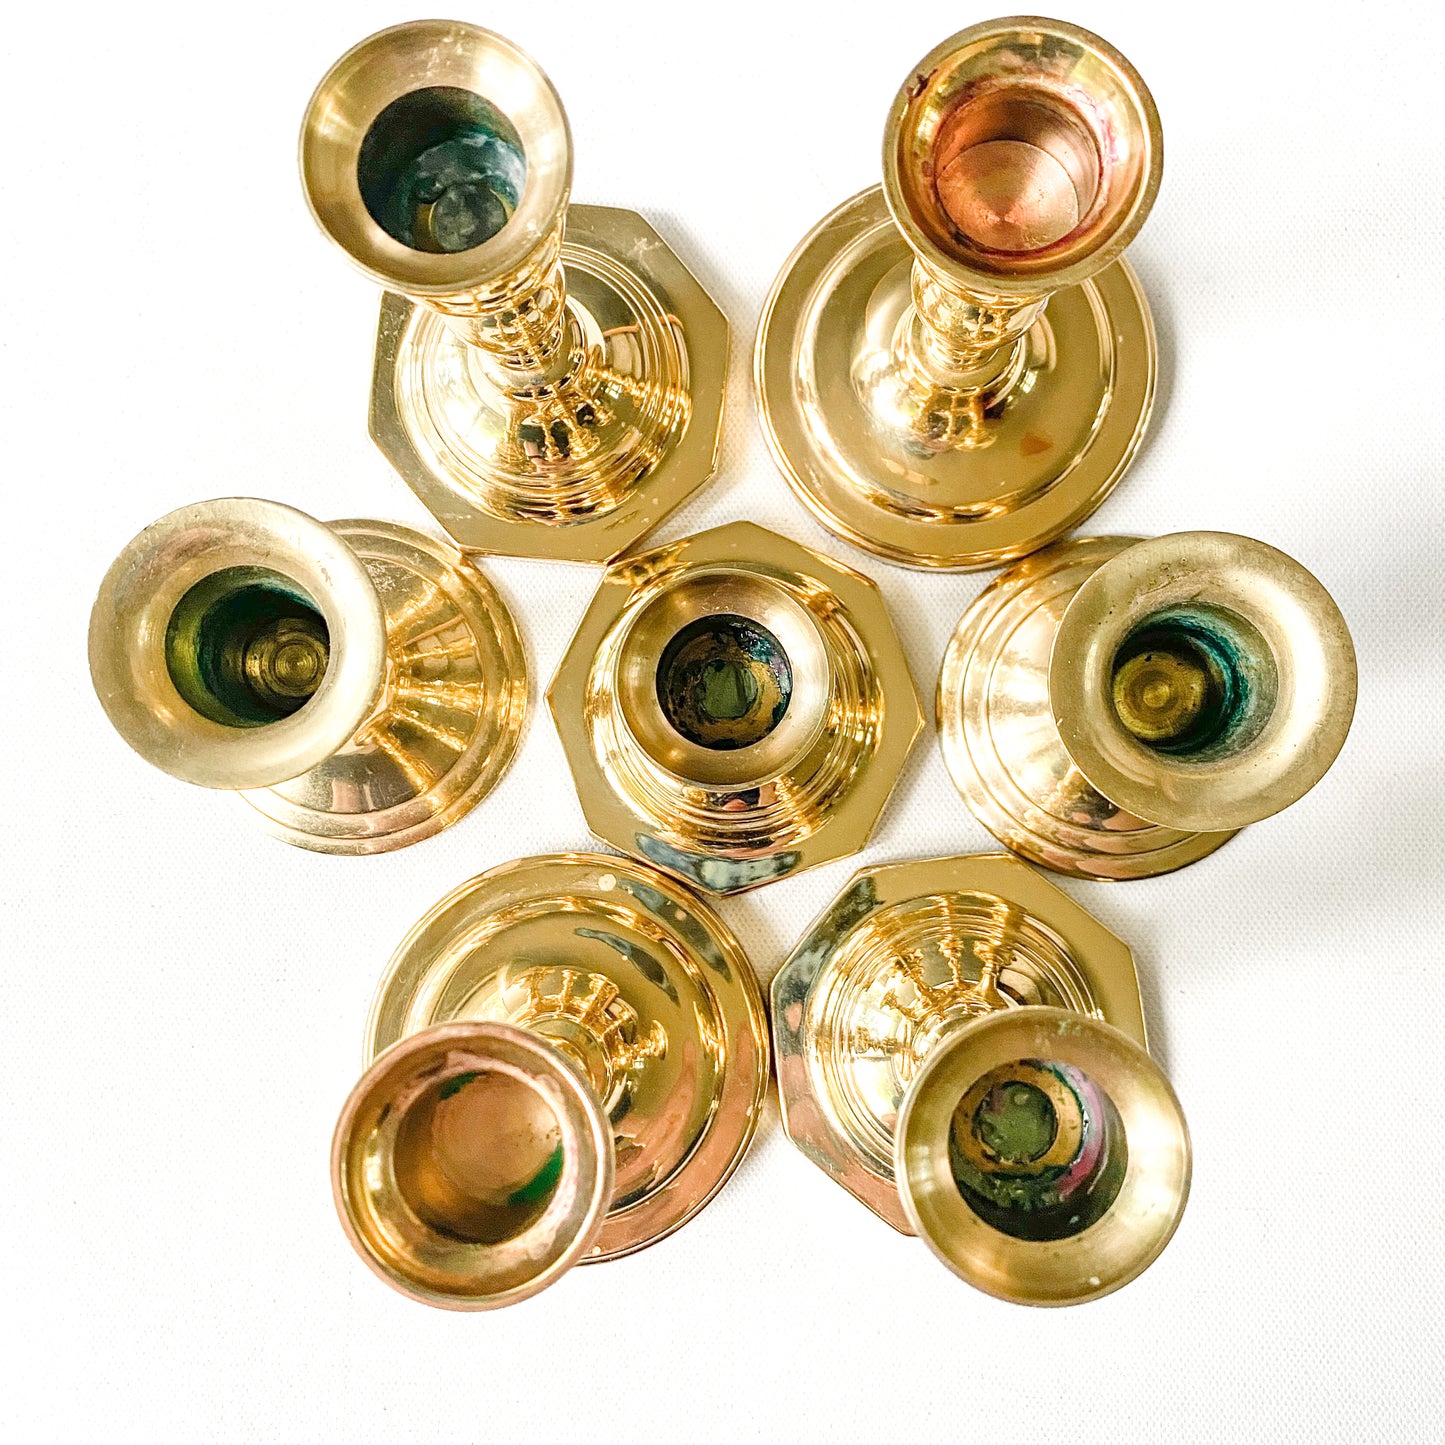 Assorted vintage brass candle holder collection, set of 7